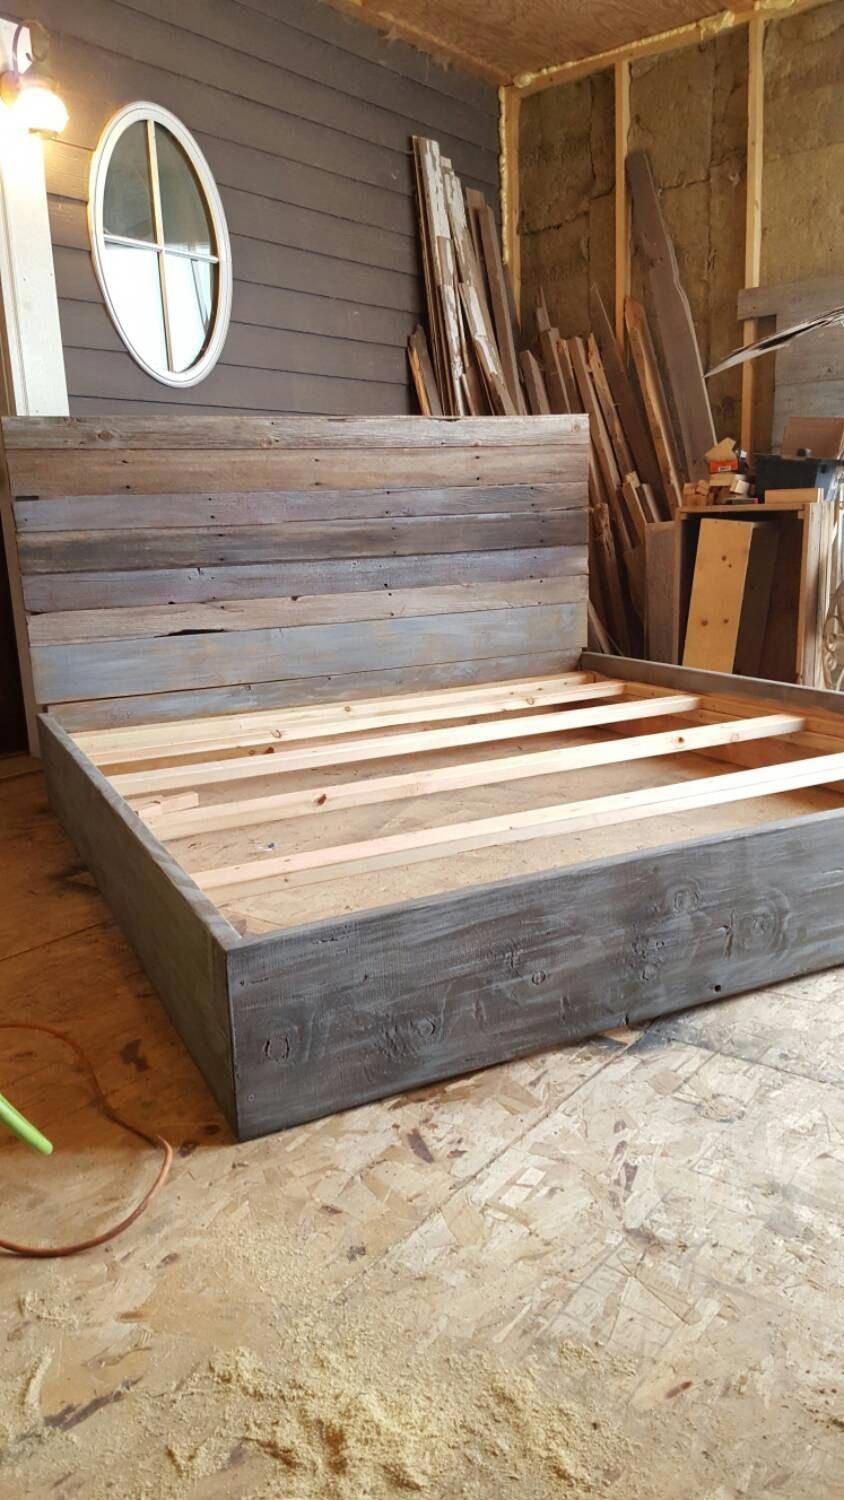 Michelle Grey Weathered Reclaimed recylced wood Headboard - Michelle Grey Weathered Reclaimed recylced wood Headboard -   18 diy Bed Frame high ideas